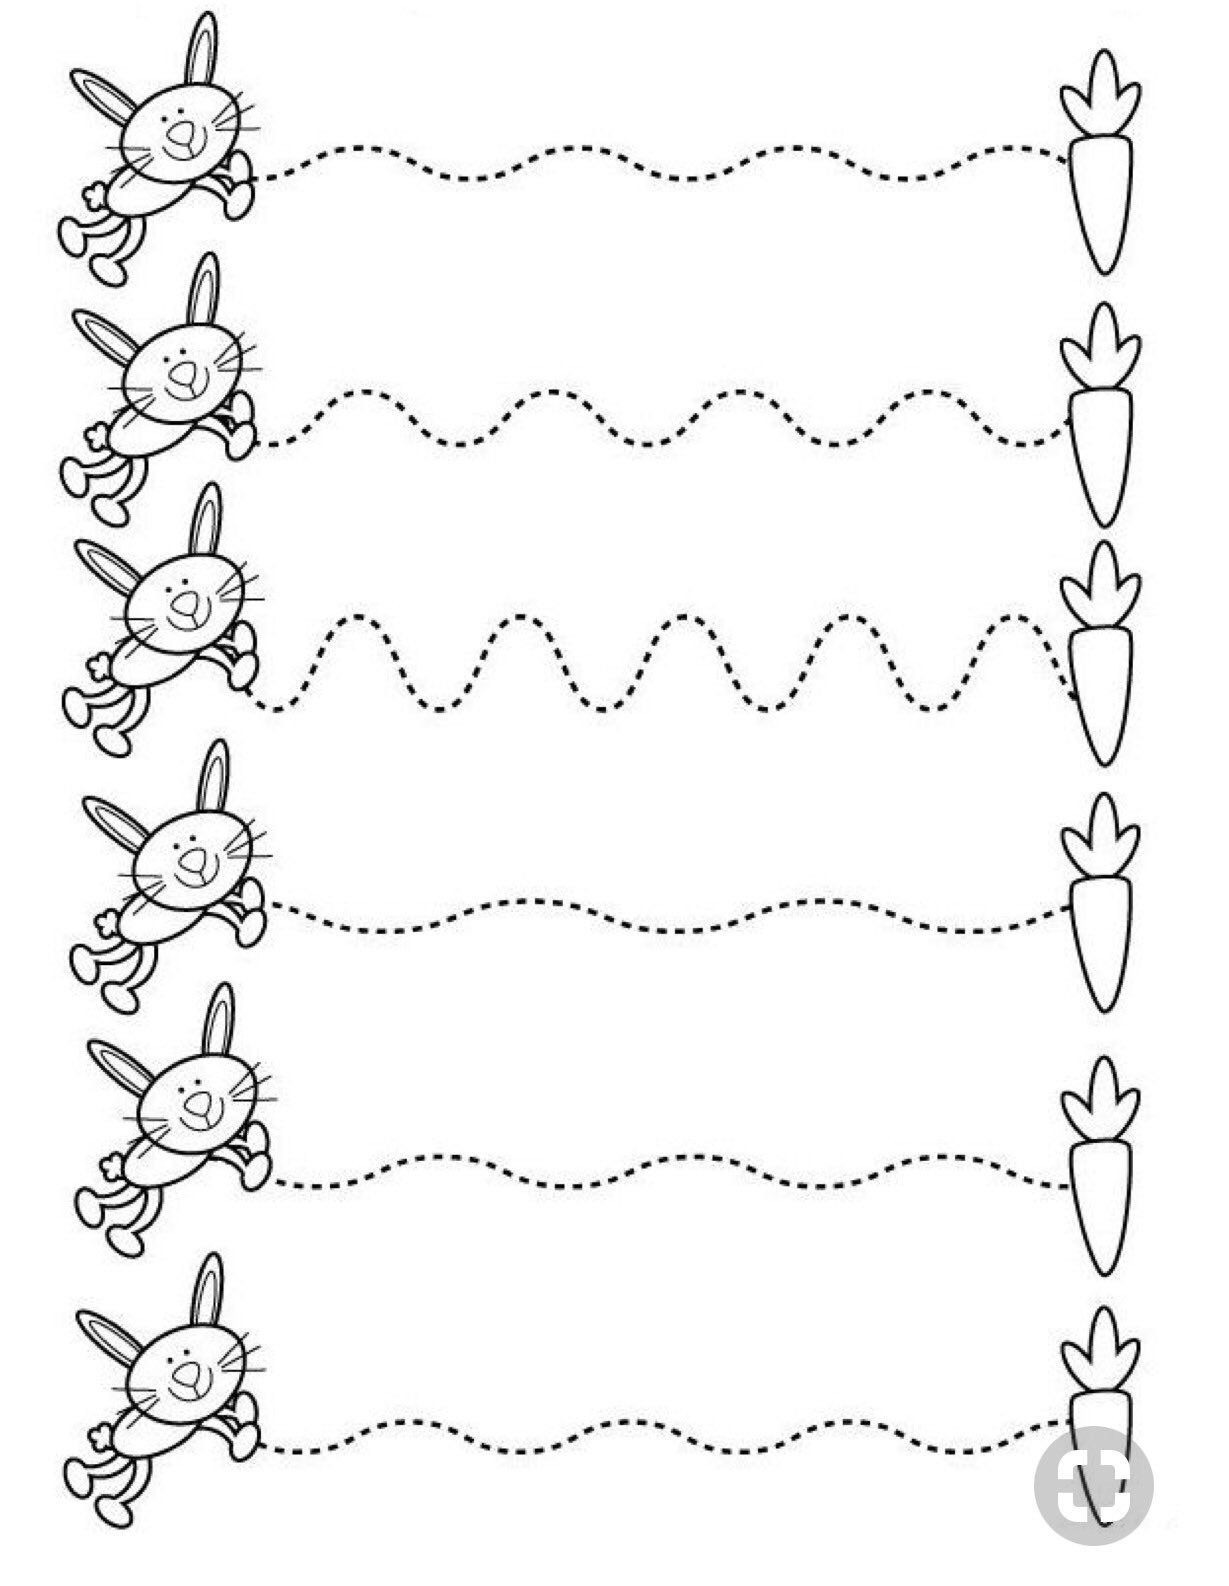 tracing-lines-worksheets-for-3-year-olds-alphabetworksheetsfree